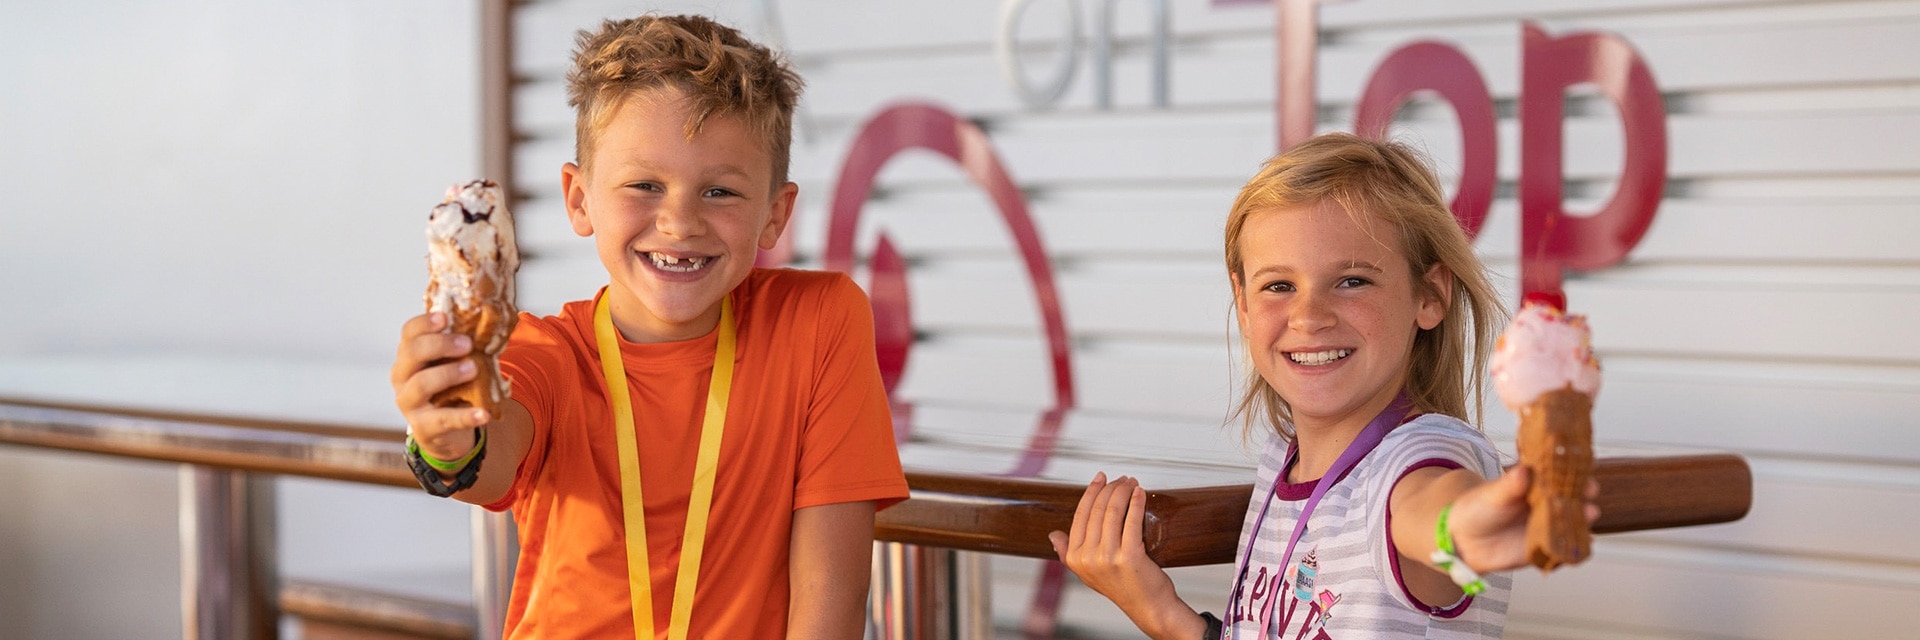 two kids holding up ice cream cones onboard a carnival cruise ship